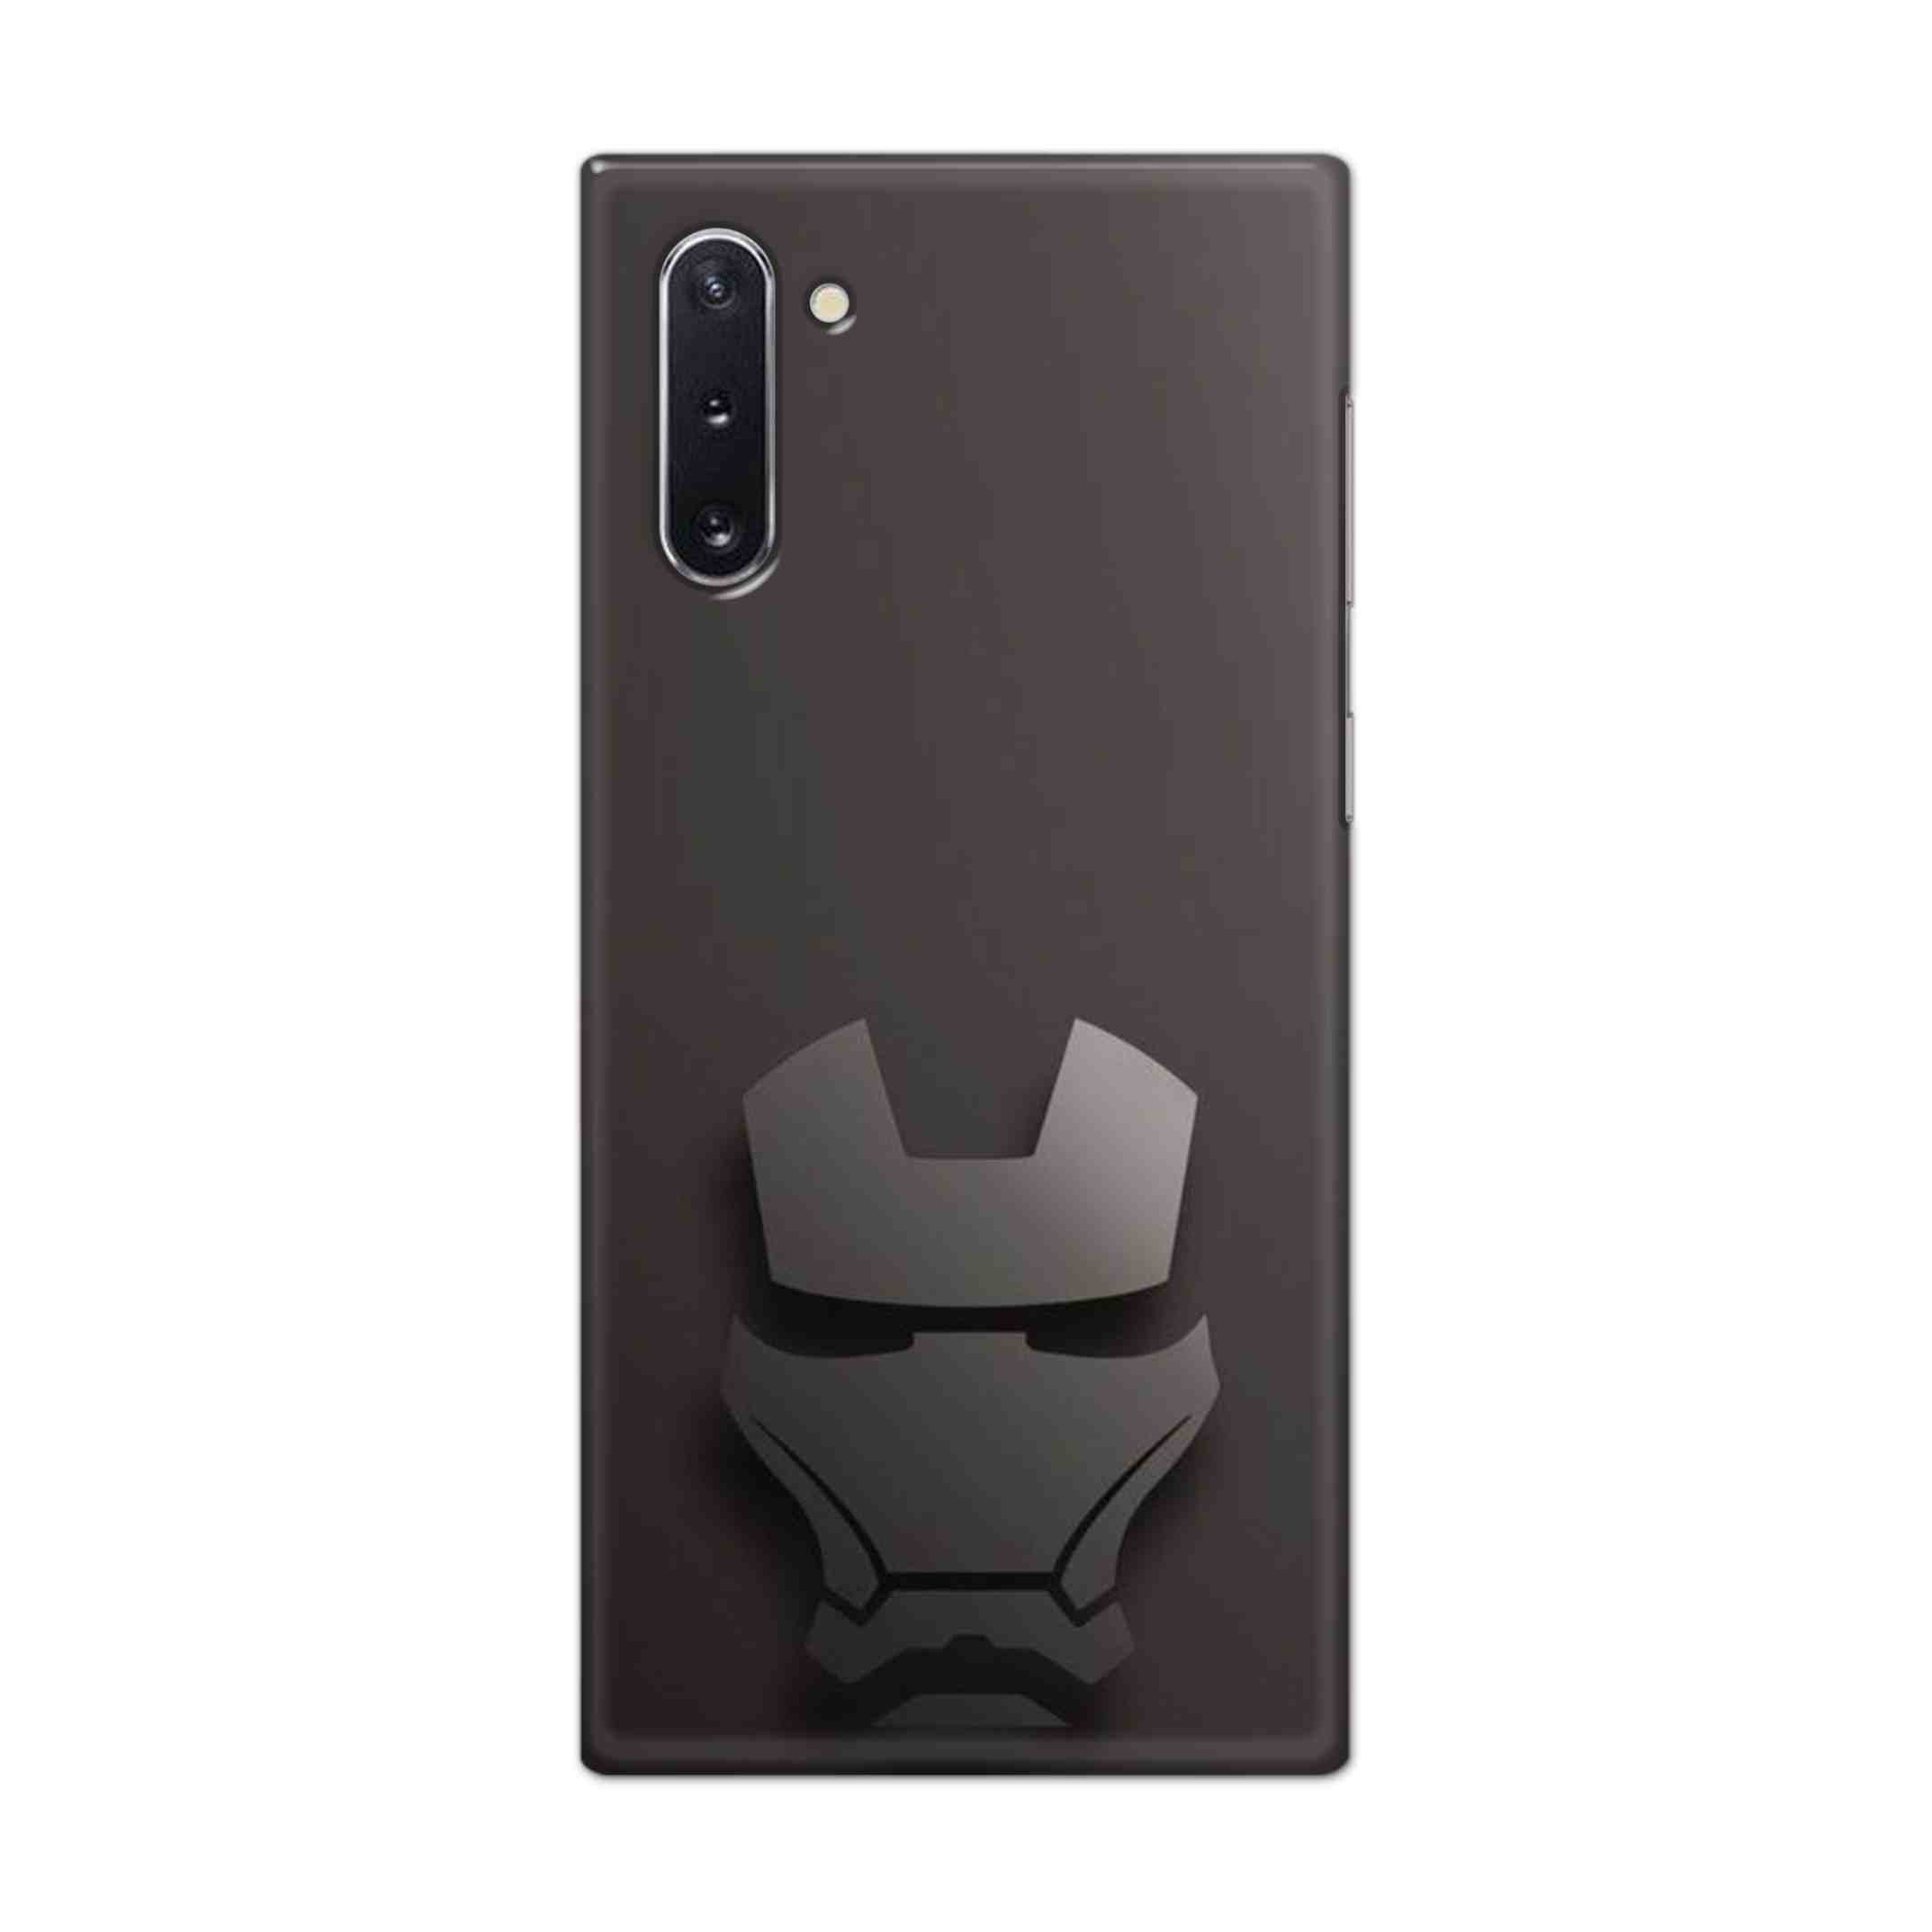 Buy Iron Man Logo Hard Back Mobile Phone Case Cover For Samsung Galaxy Note 10 Online